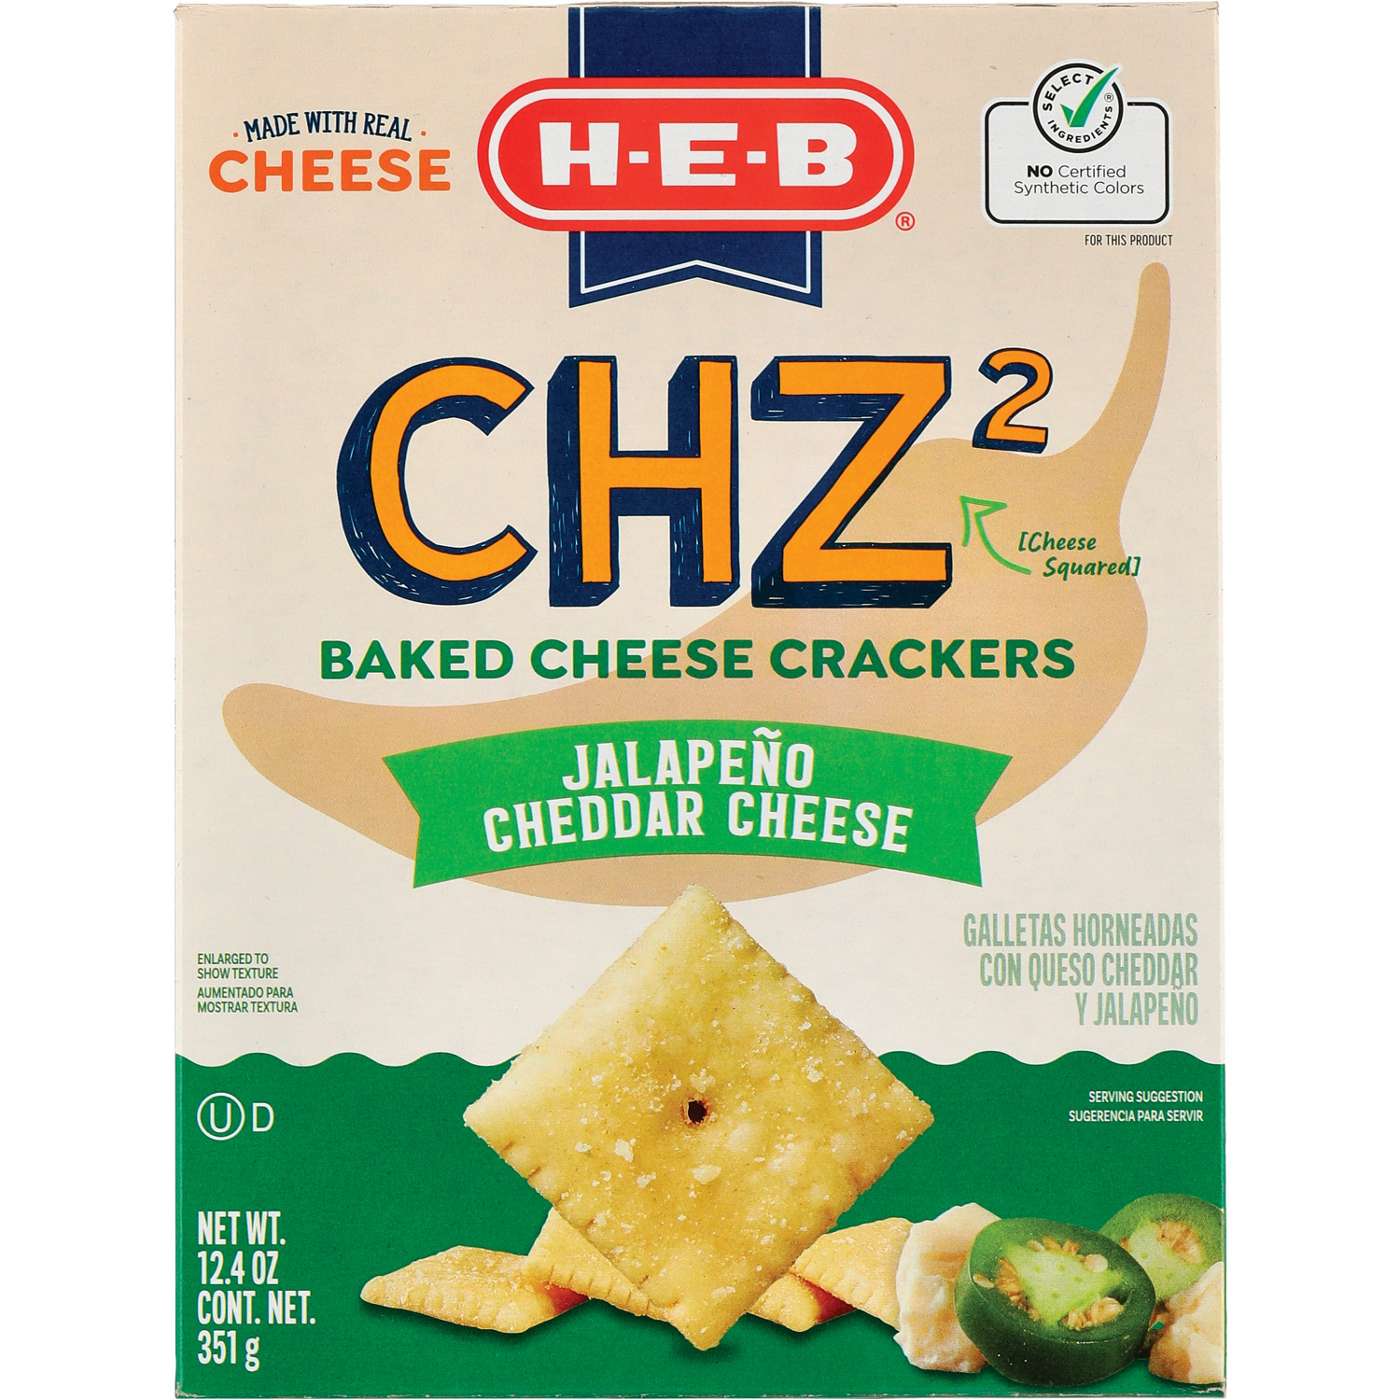 H-E-B CHZ2 Baked Cheese Crackers - Jalapeno Cheddar Cheese; image 1 of 2